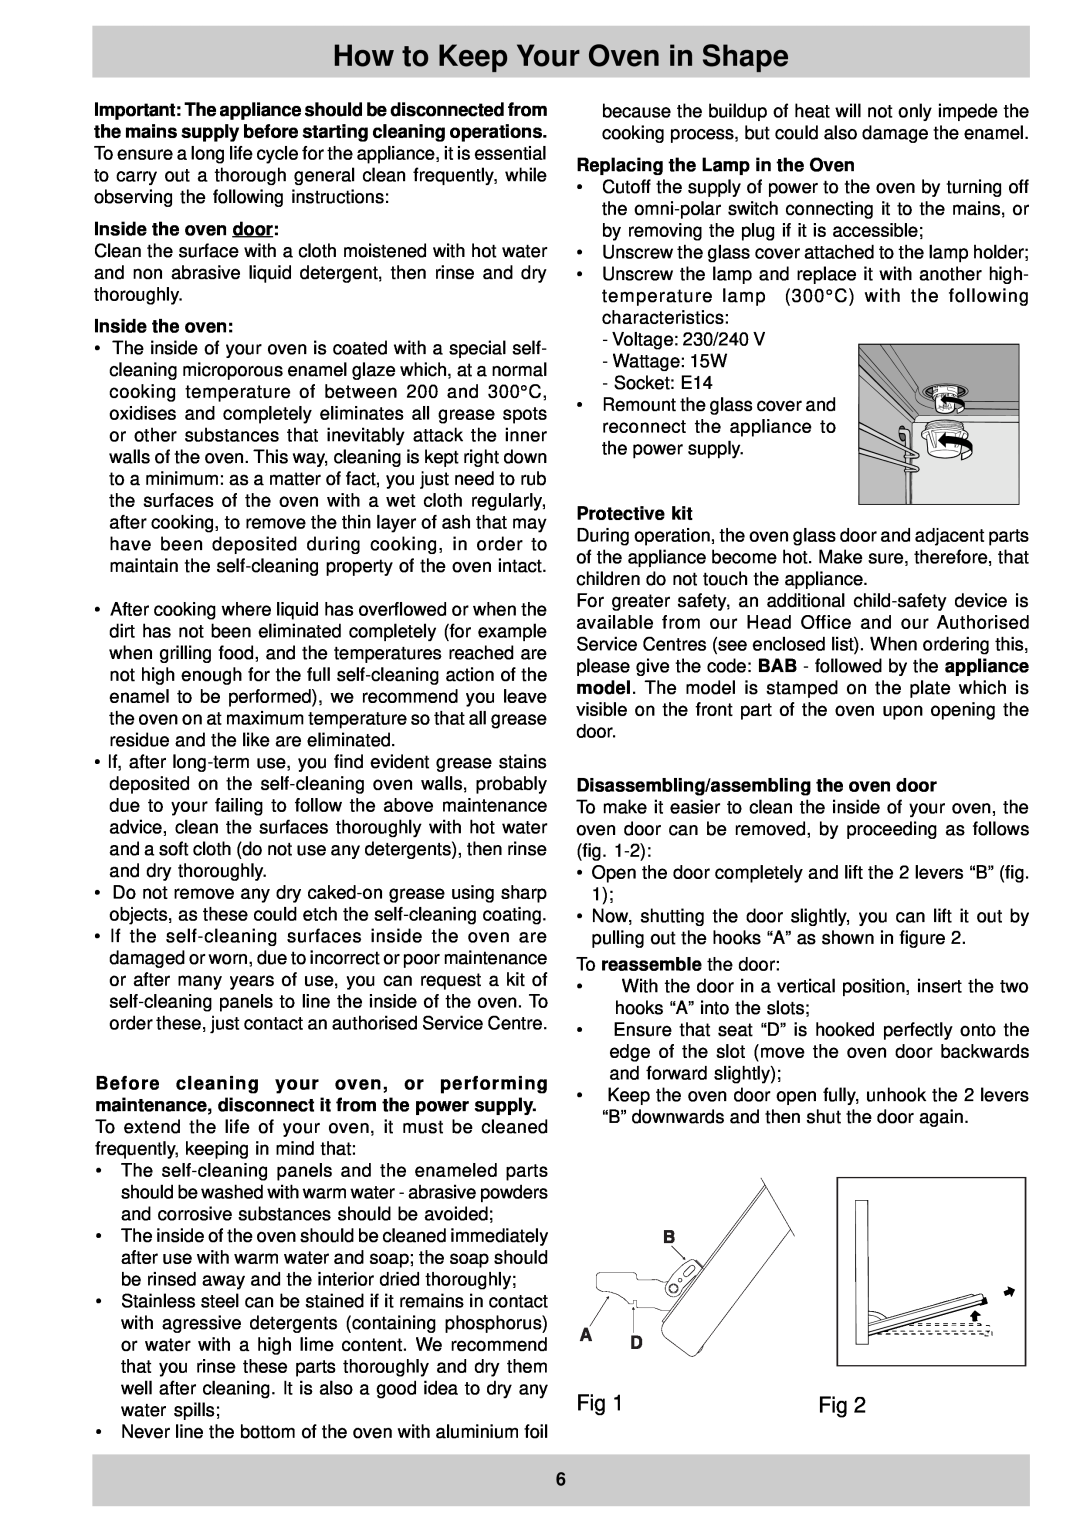 Ariston MB 91 AUS How to Keep Your Oven in Shape, Inside the oven door, Replacing the Lamp in the Oven, Protective kit 